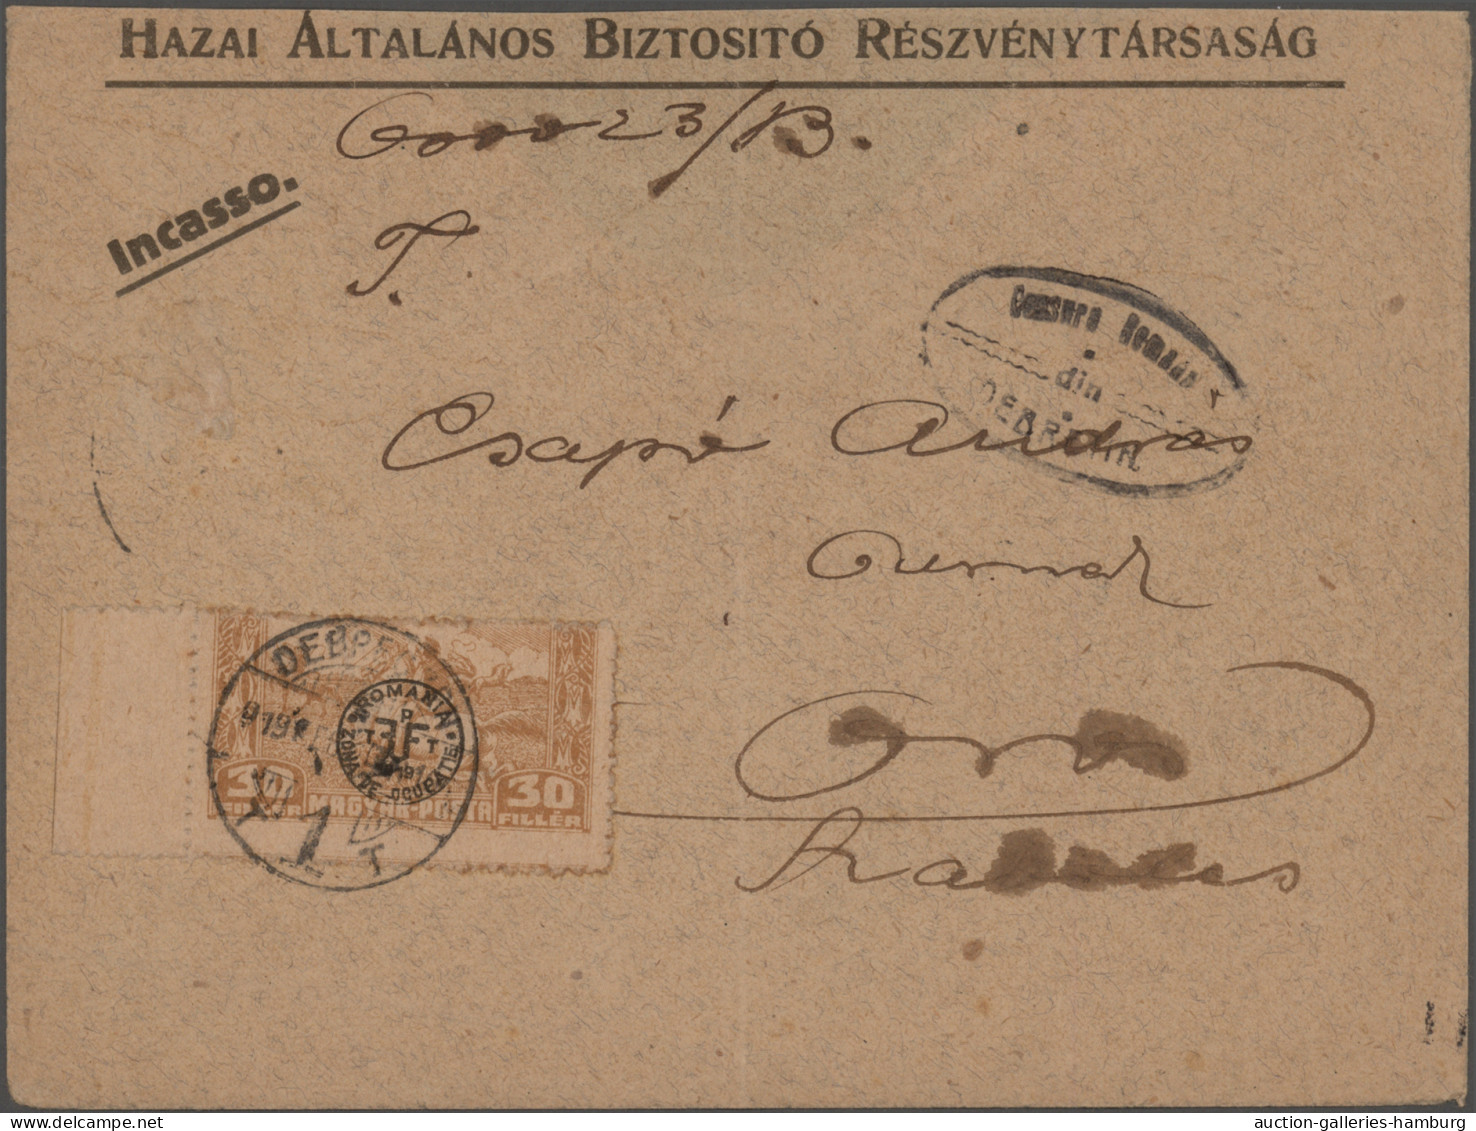 Hungary: 1919/1920, collection of 66 covers/cards showing a lovely range of inte